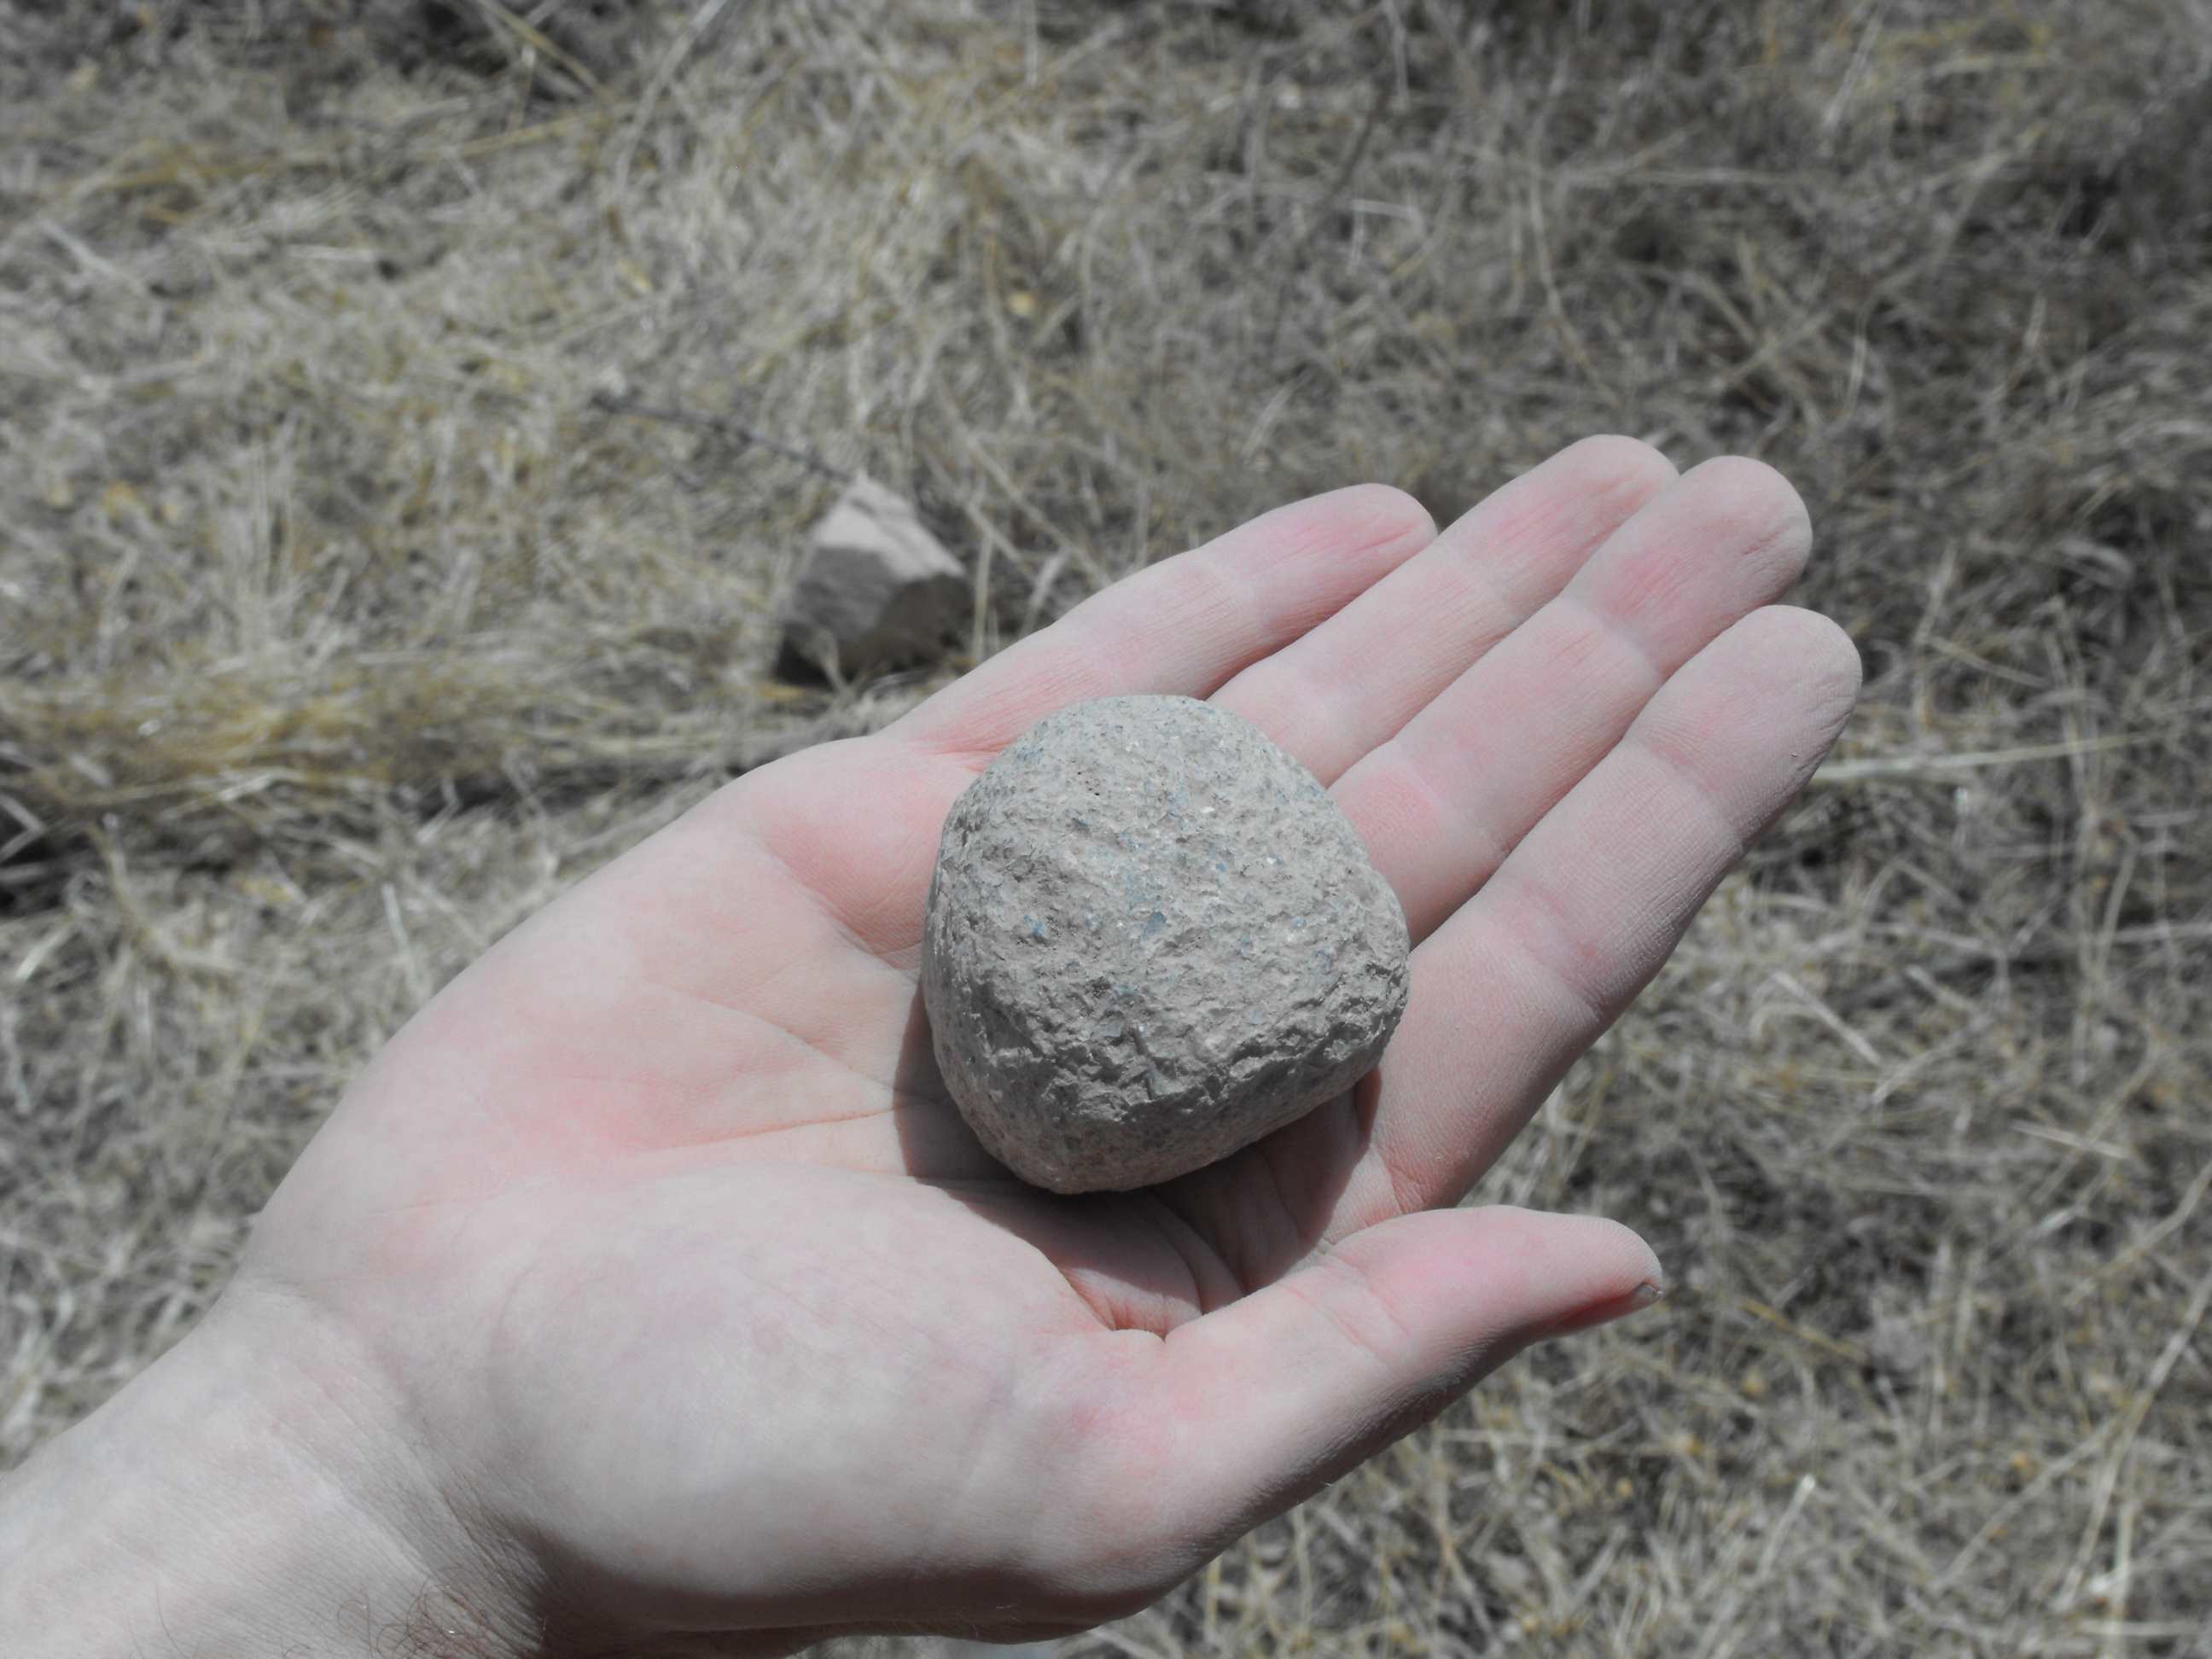 A sling stone find at Khirbet Qeiyafa | Bible, Archaeology, and ...